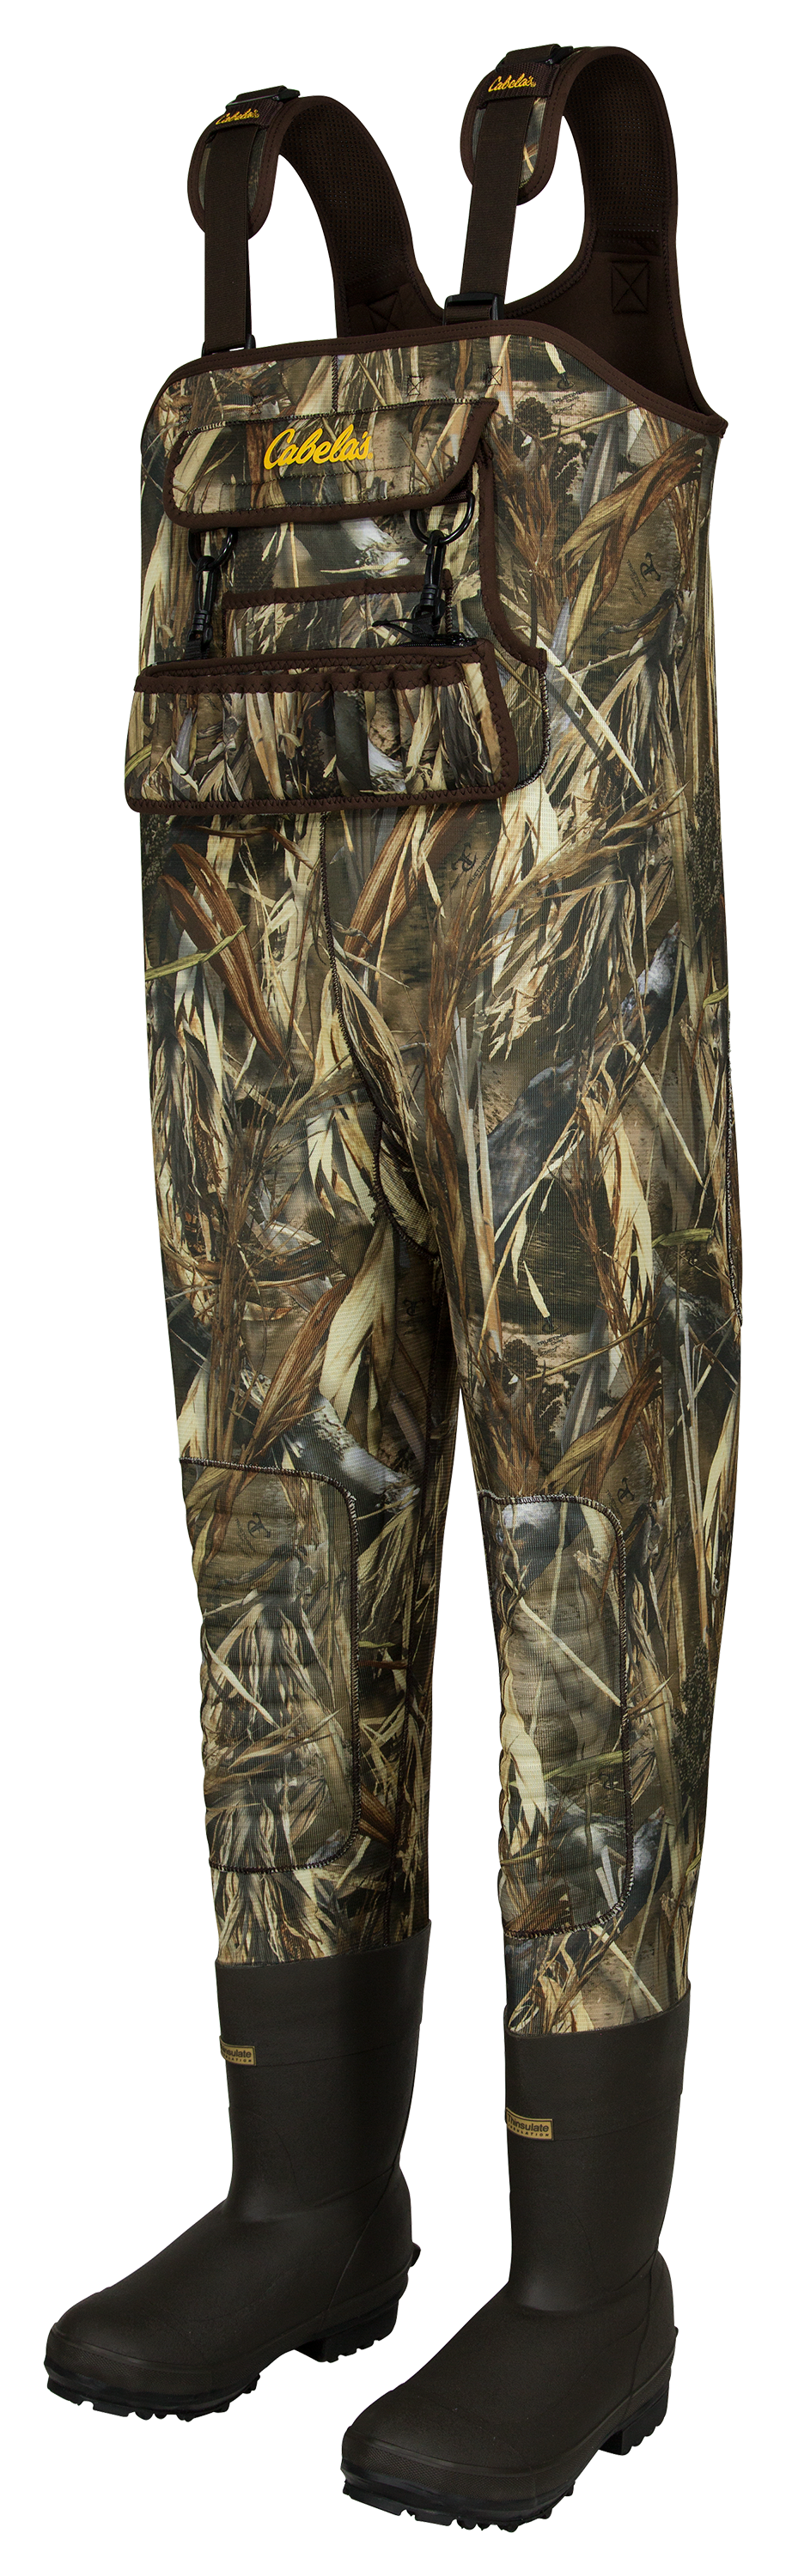 Fishing Waders for Men for sale in Anchorage, Alaska